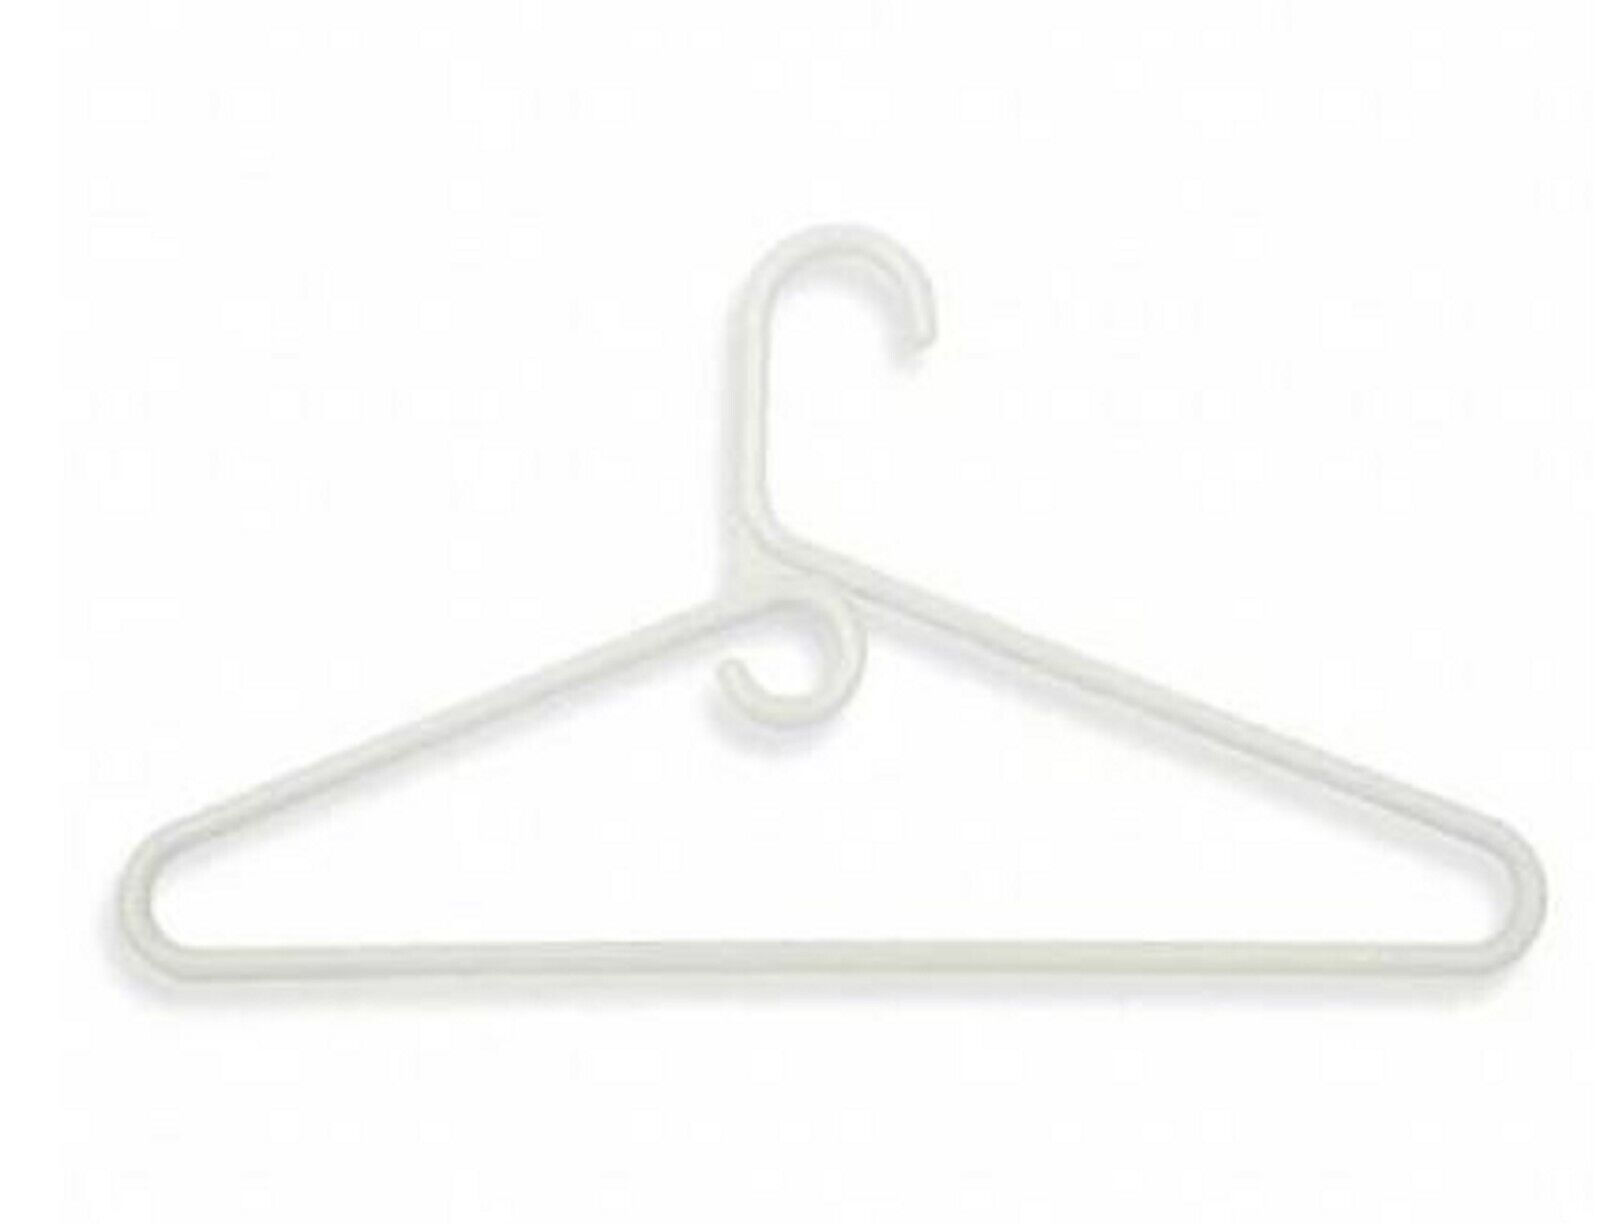 Mainstays Heavy Weight Clothing Hangers, 9 Pack, White, Durable 